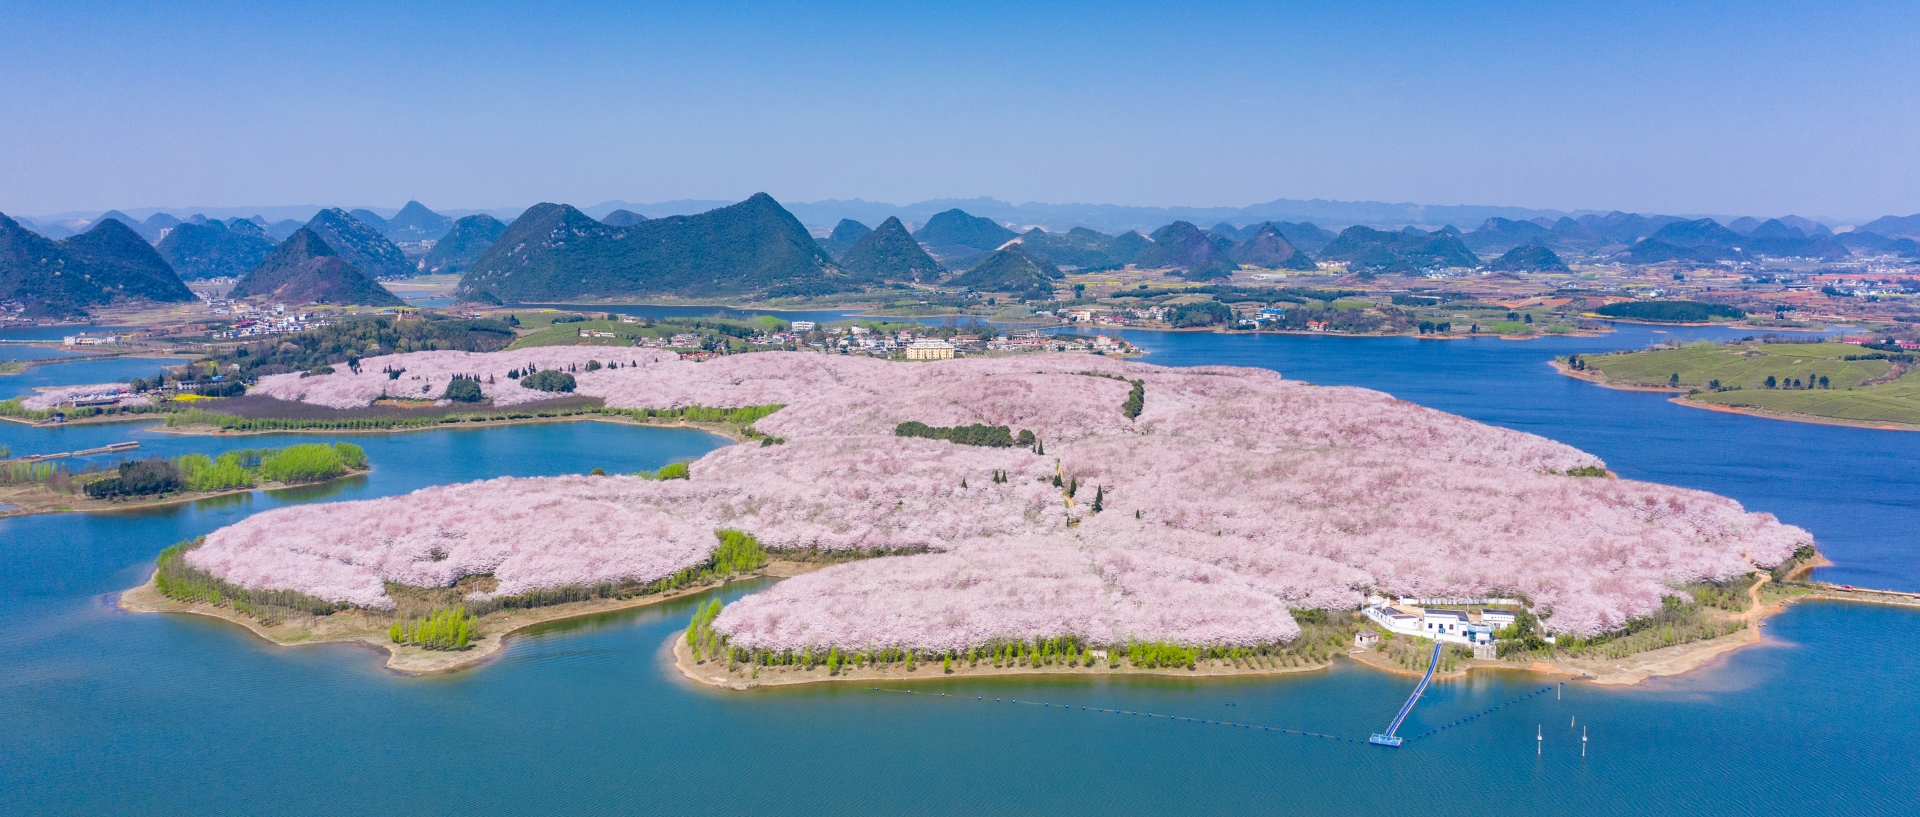 Cherry blossoms come to life in Gui'an